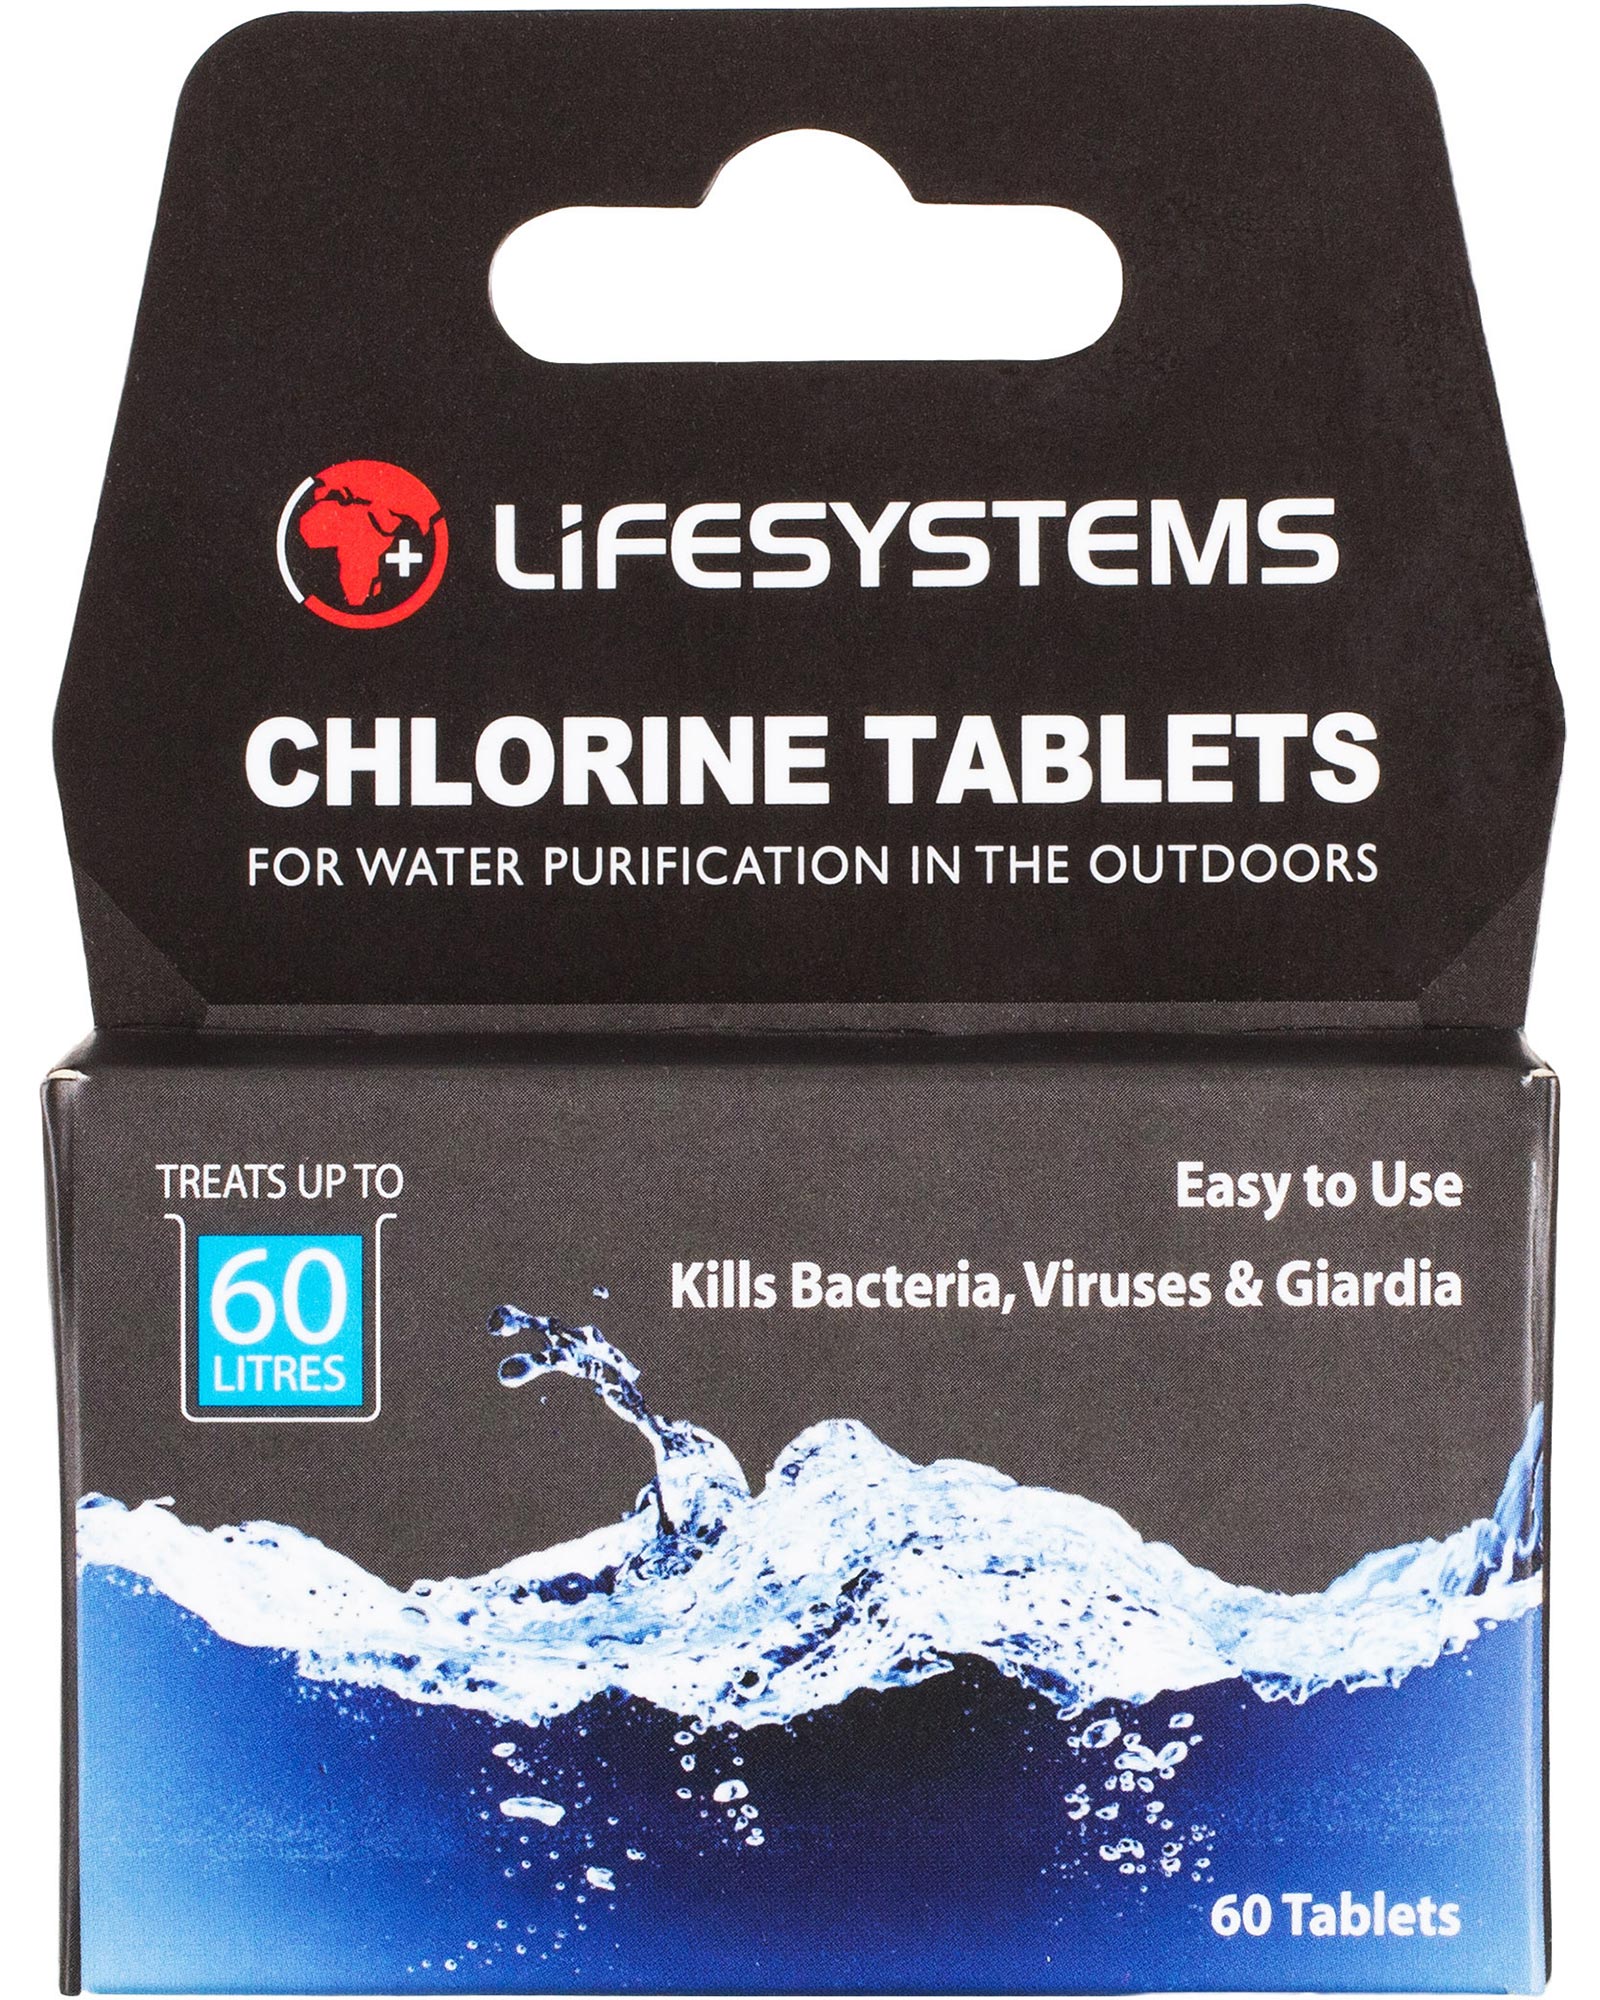 Lifesystems Chlorine Tablets (60 Pack)